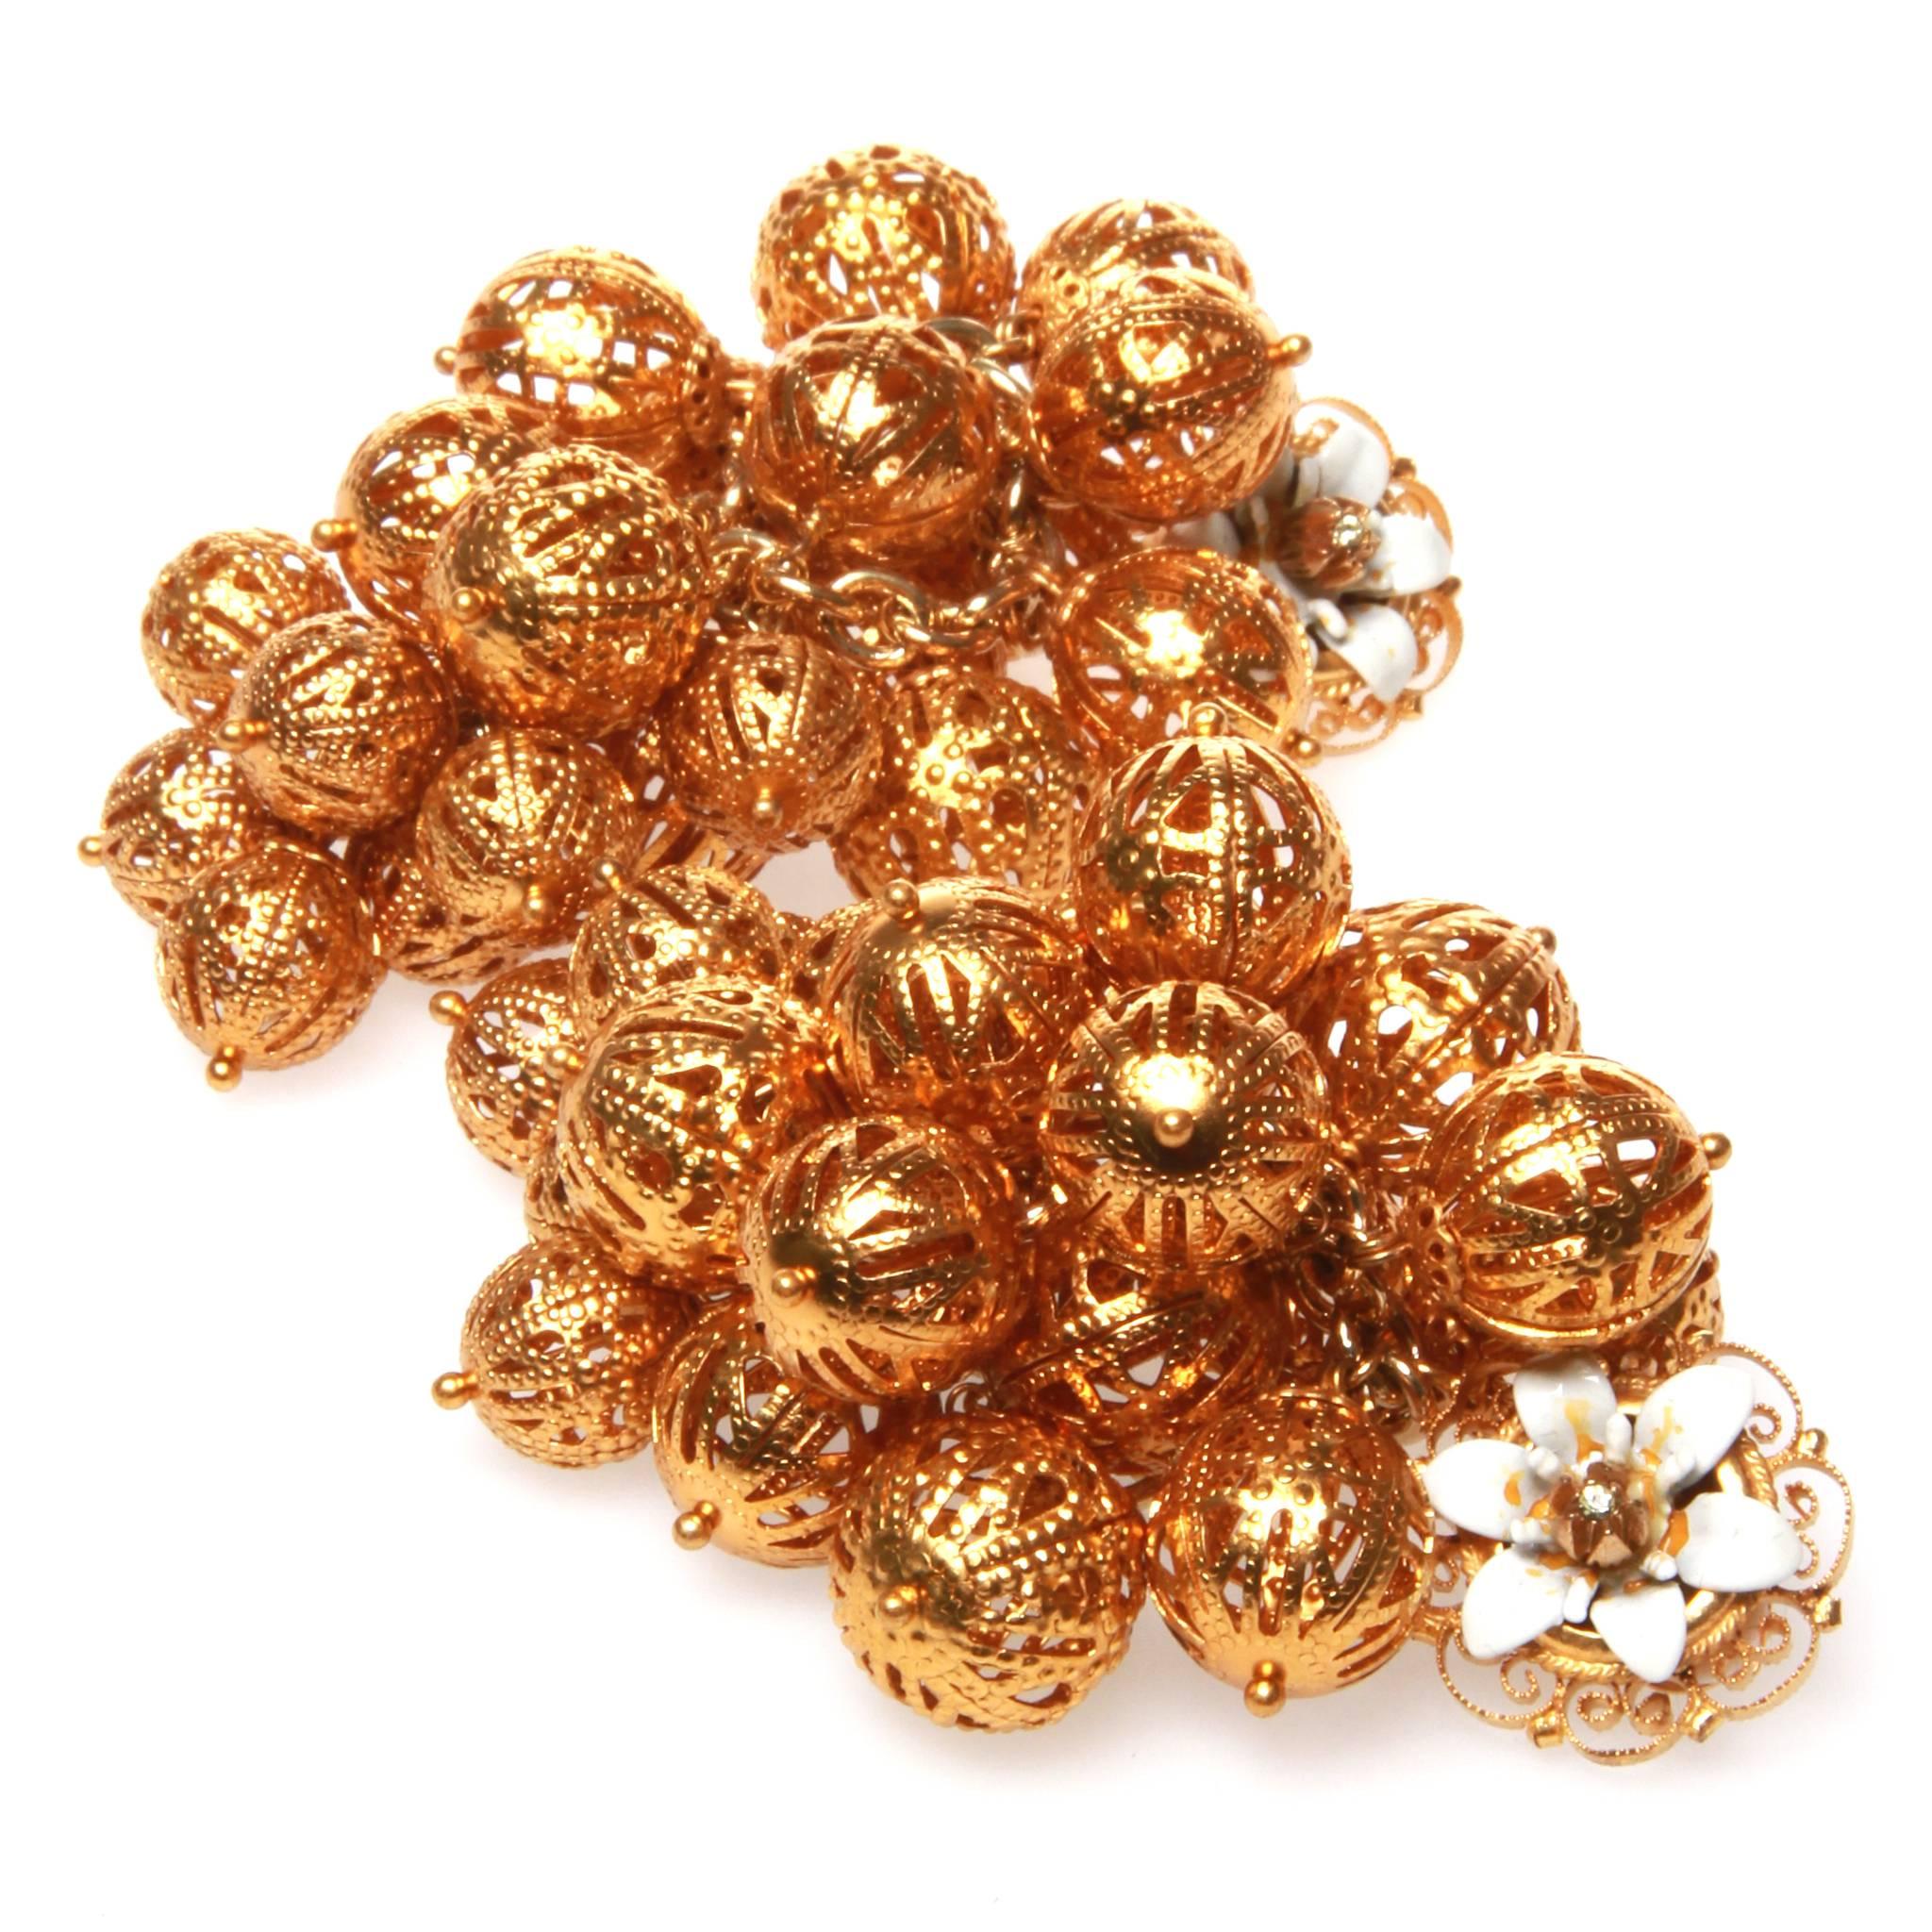 Dolce and Gabbana clip on earrings featuring a bunch of intricately metal-worked golden balls accented with small painted metal flowers.

Comes with original box. 